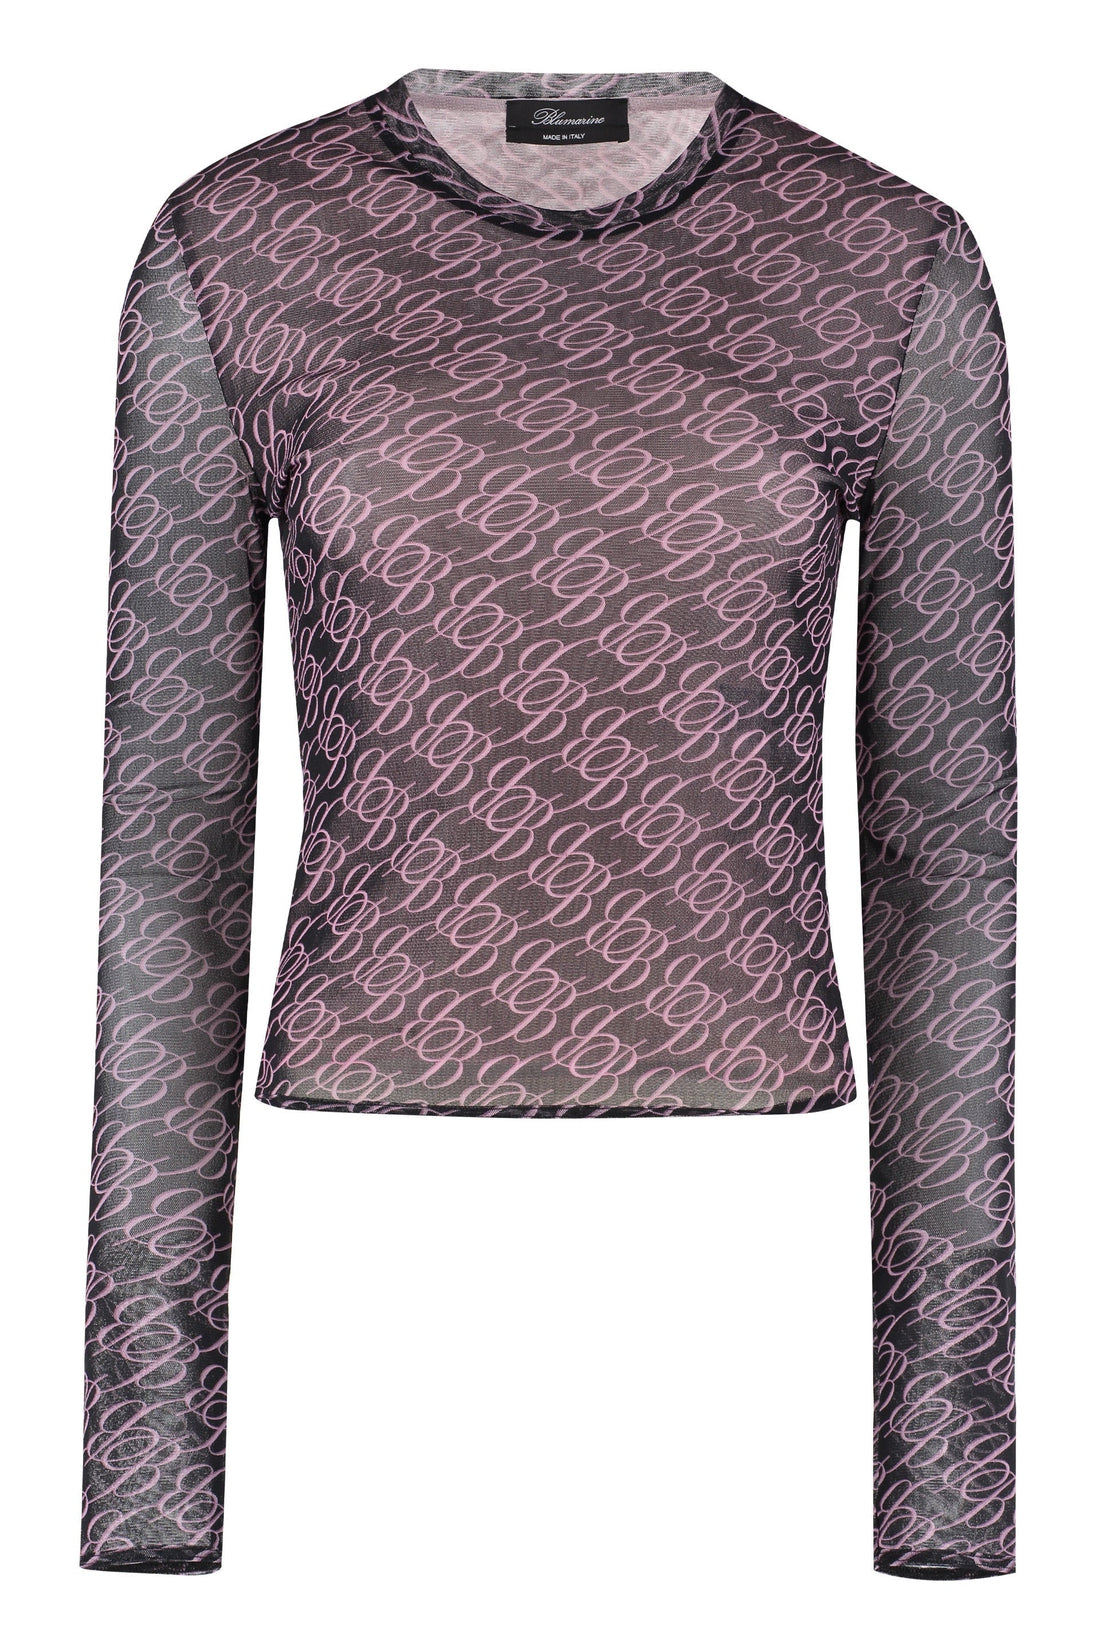 Blumarine-OUTLET-SALE-Printed long-sleeve top-ARCHIVIST